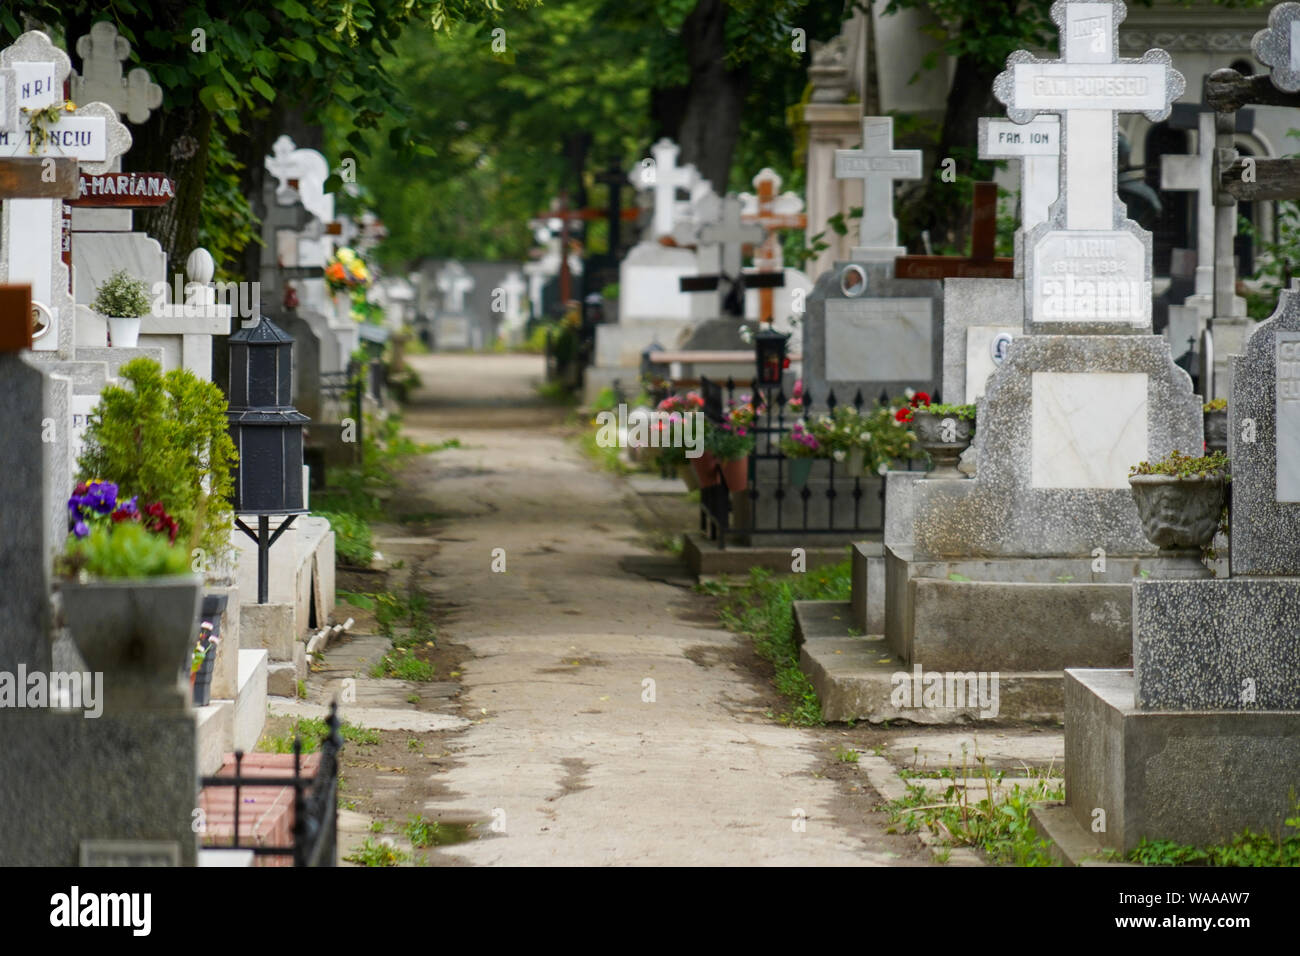 Serban Voda cemetery (commonly known as Bellu cemetery) is the largest and most famous cemetery in Bucharest, Romania. Stock Photo